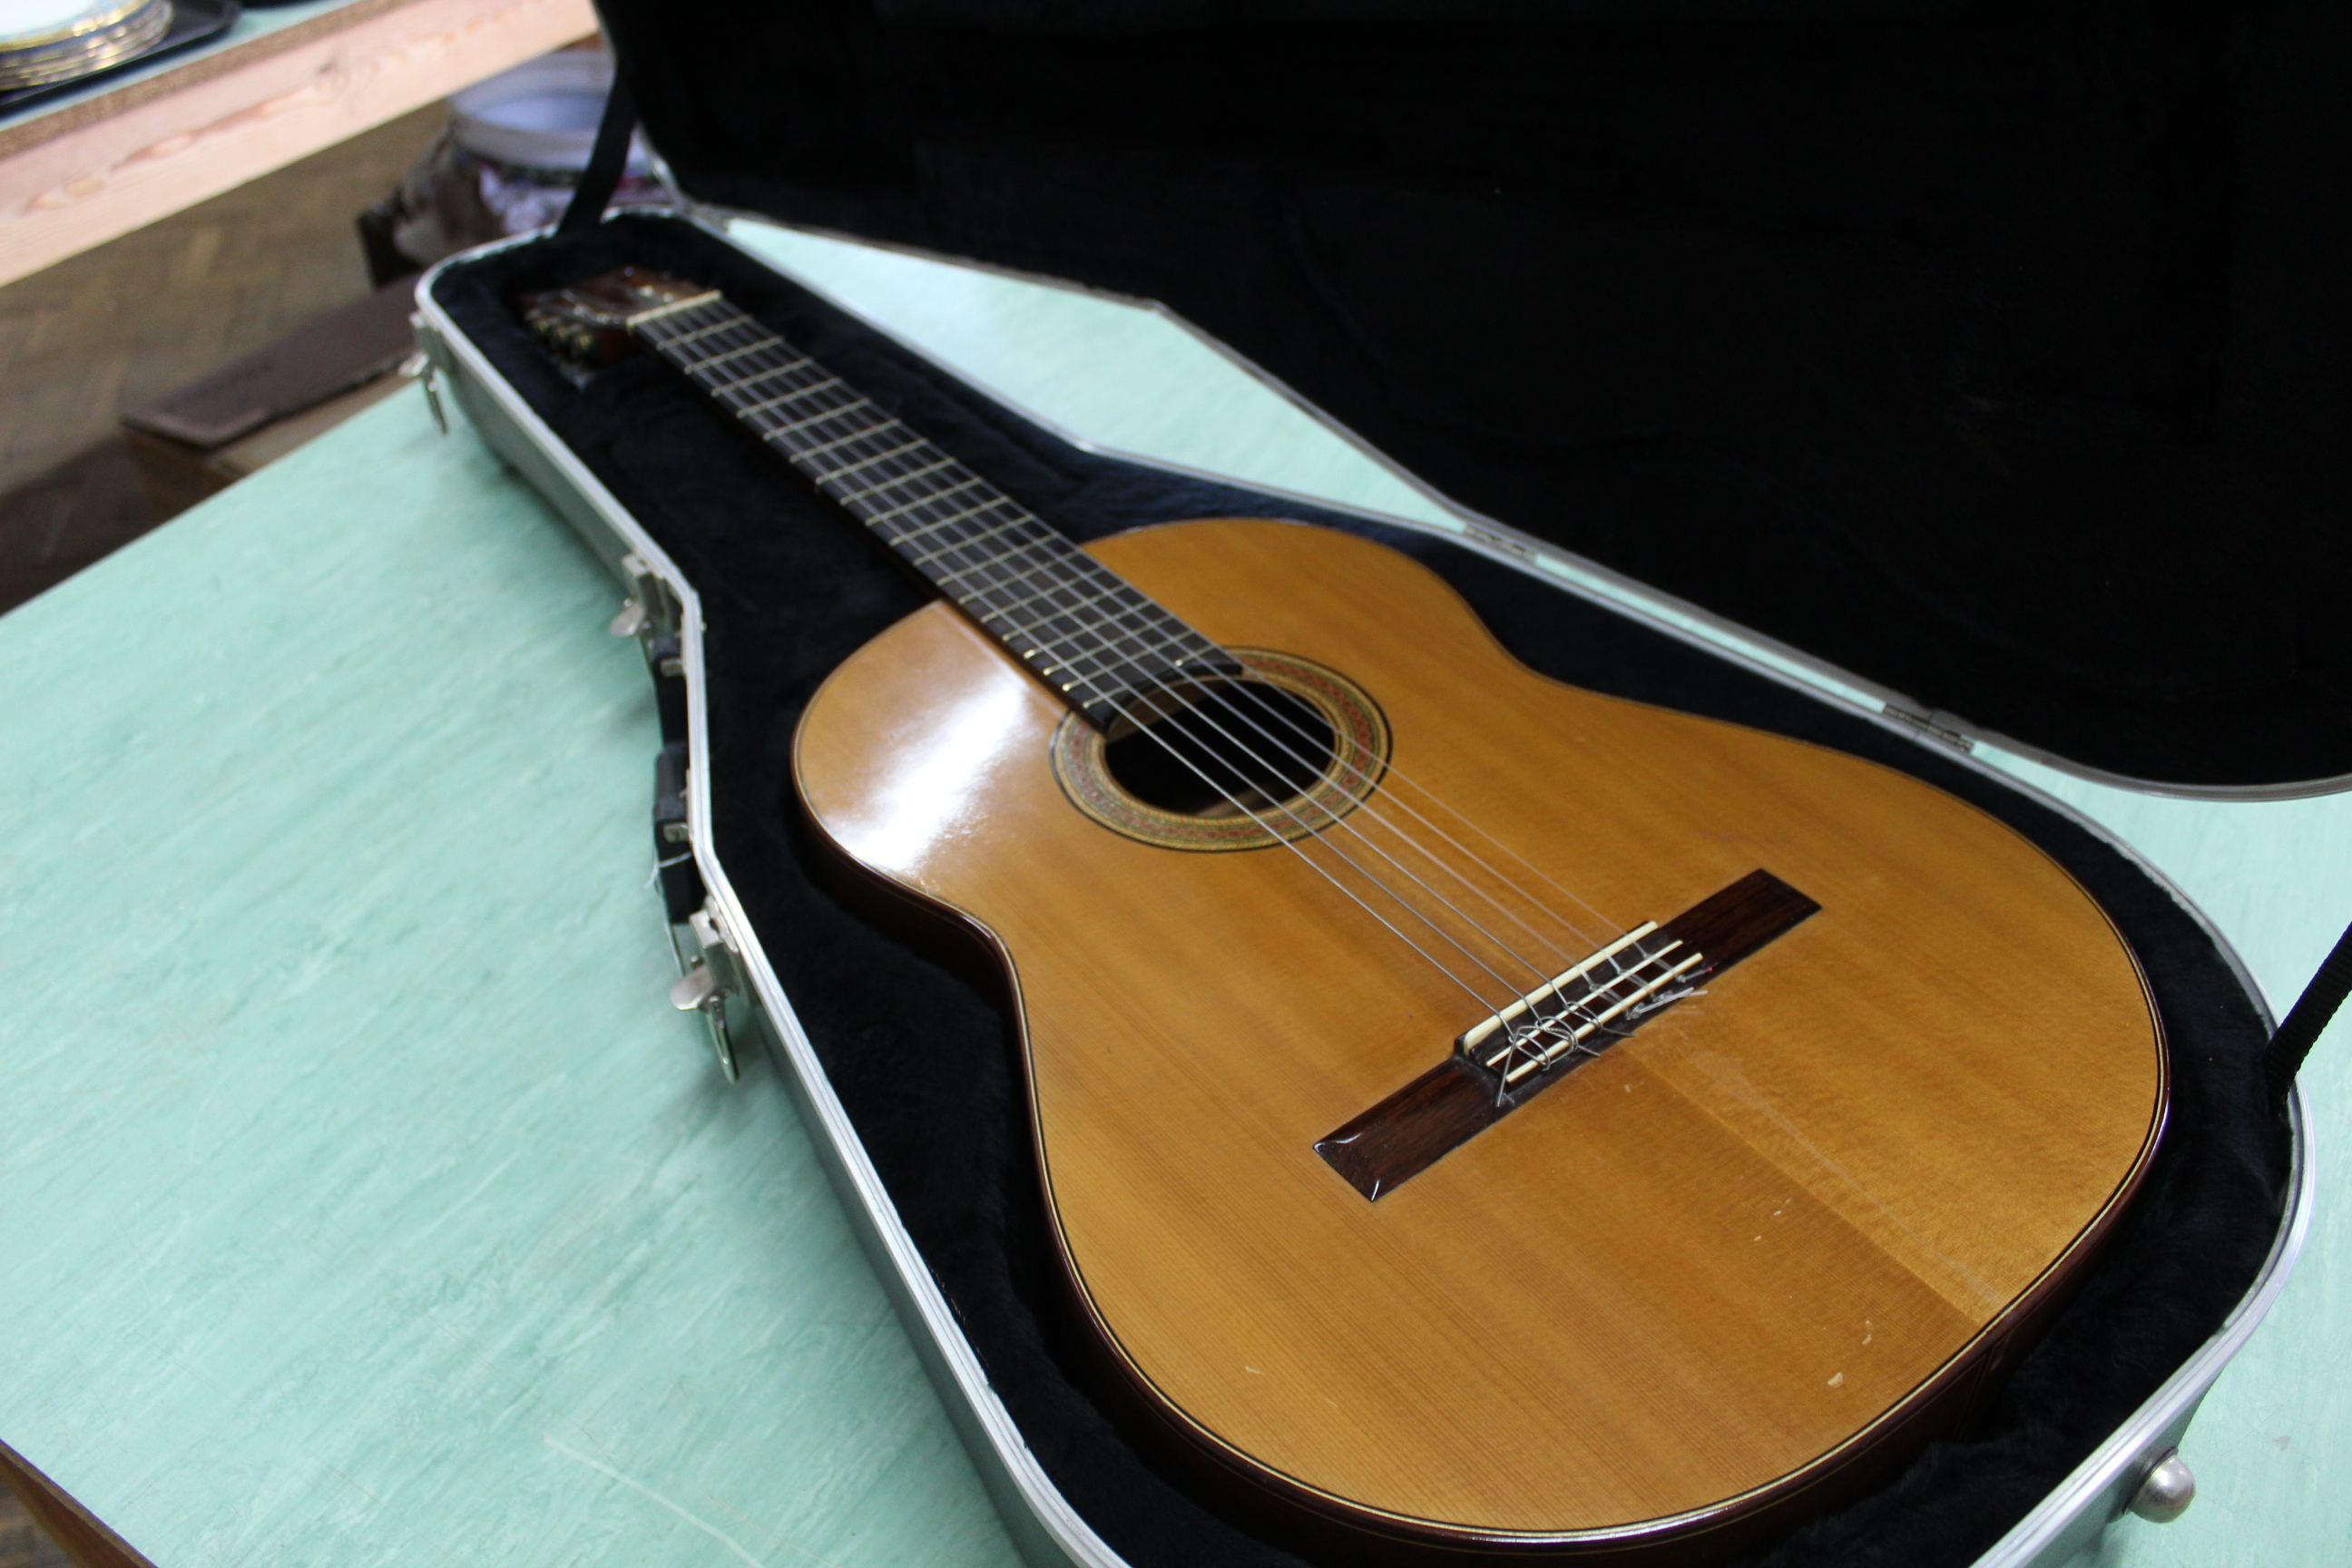 A classical guitar by A A Jones of Norwich, bears white label, dated Aug '82 in rosewood and spruce,